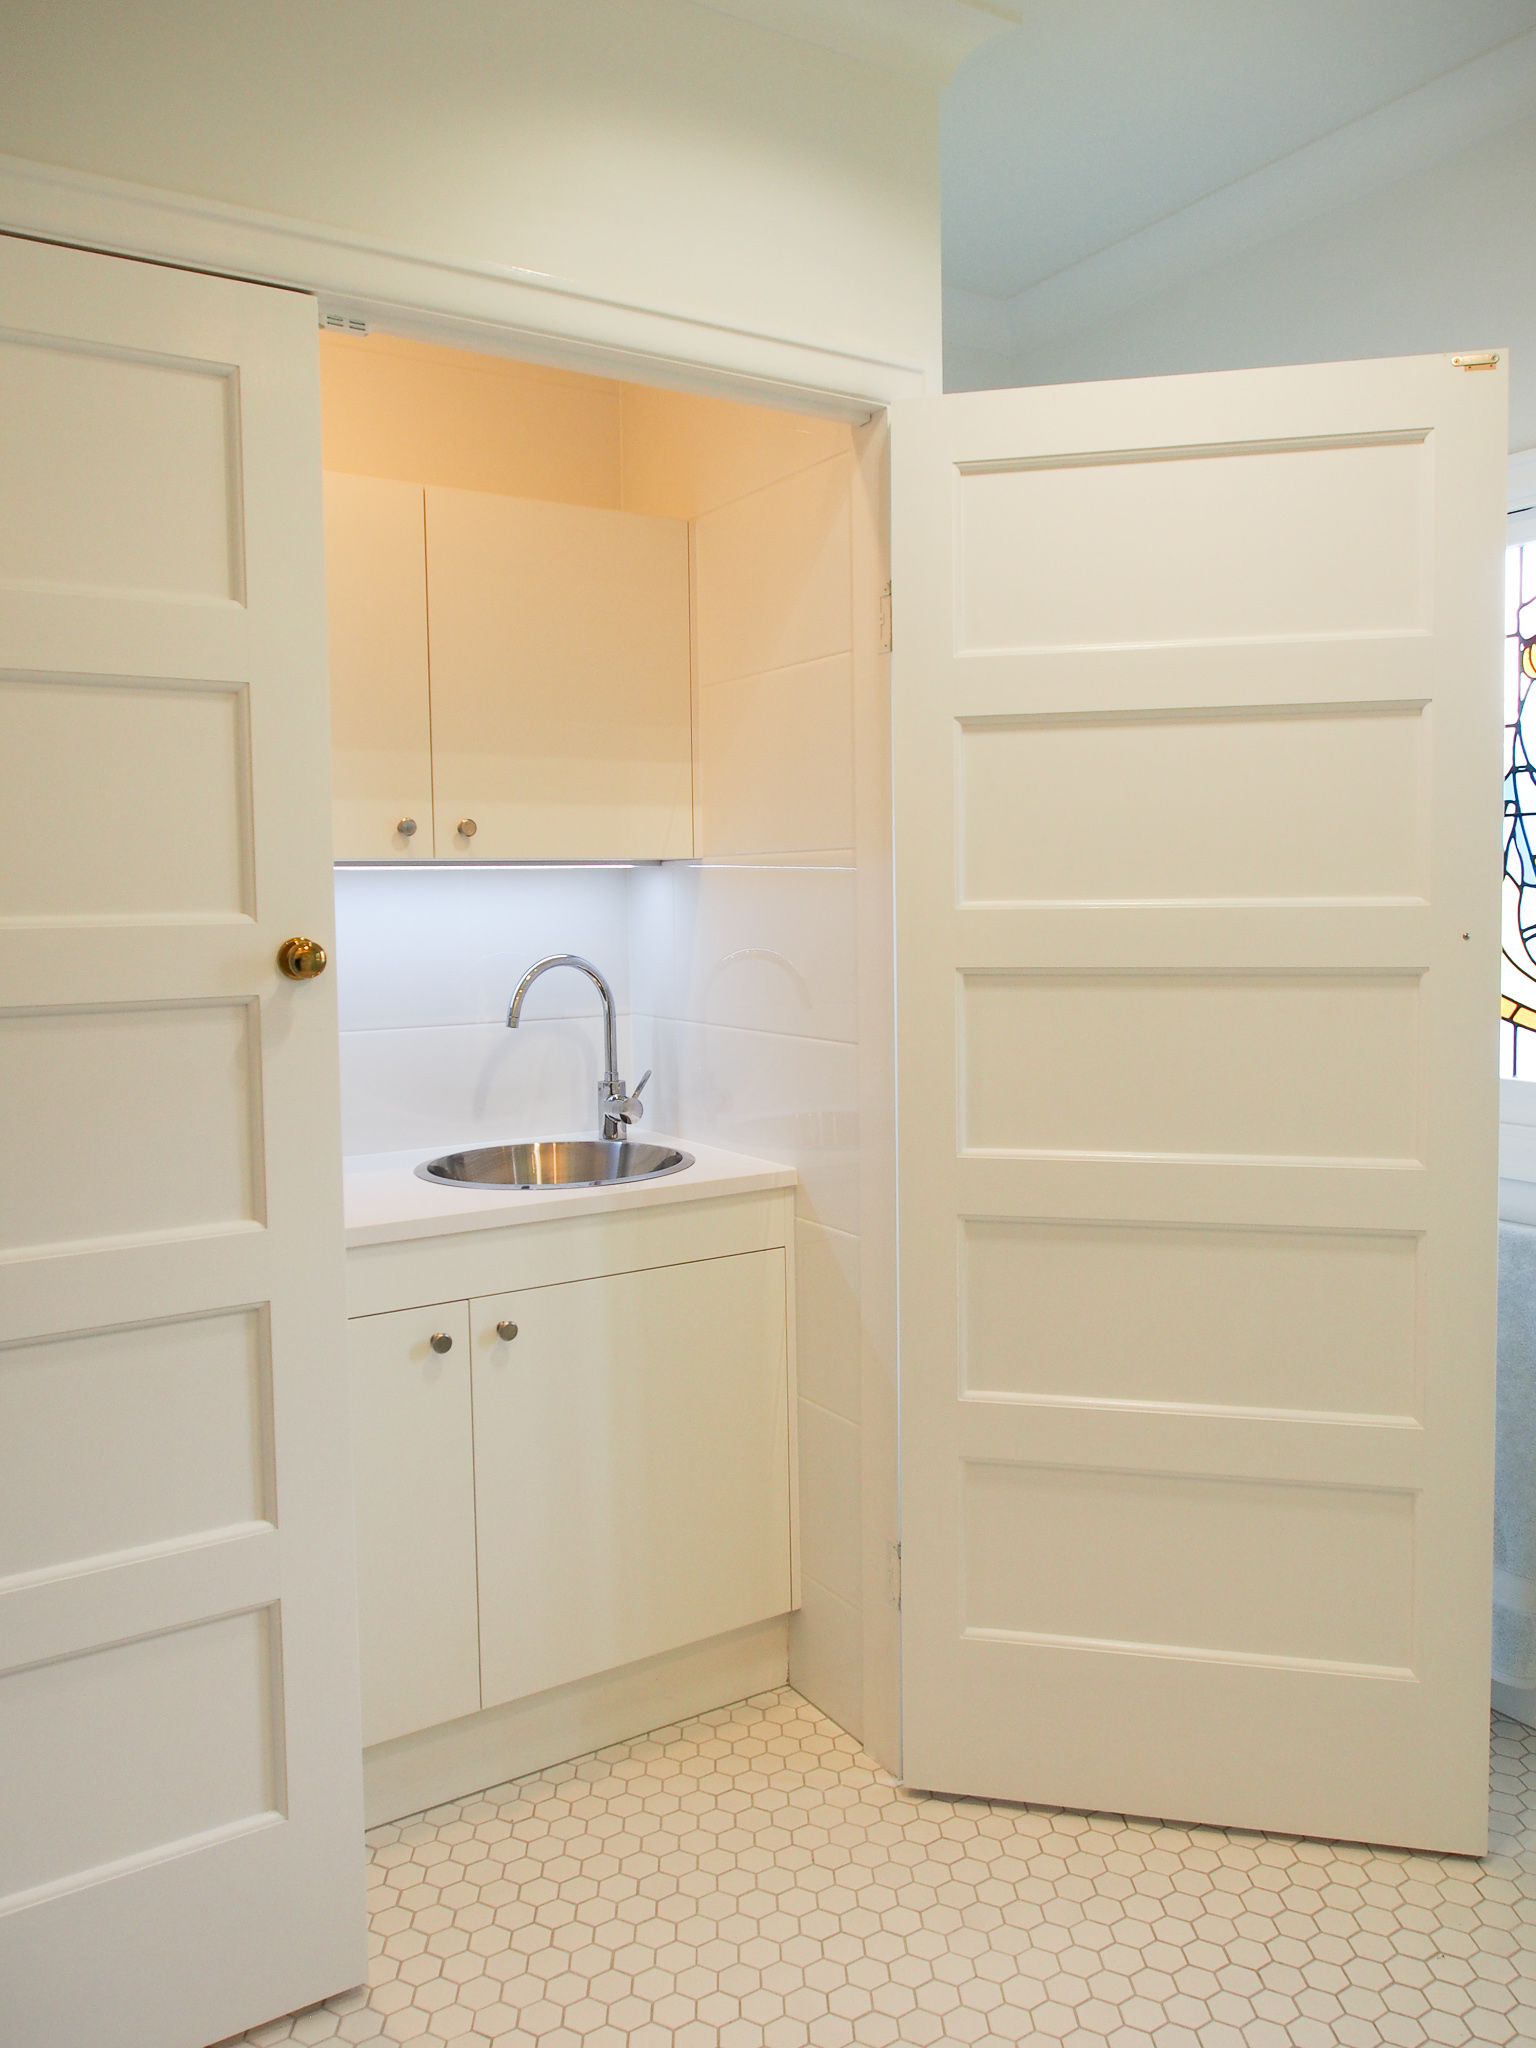 The toilet suite is cleverly hidden away behind the cabinetry to house the laundry Concealed laundry in bathroom